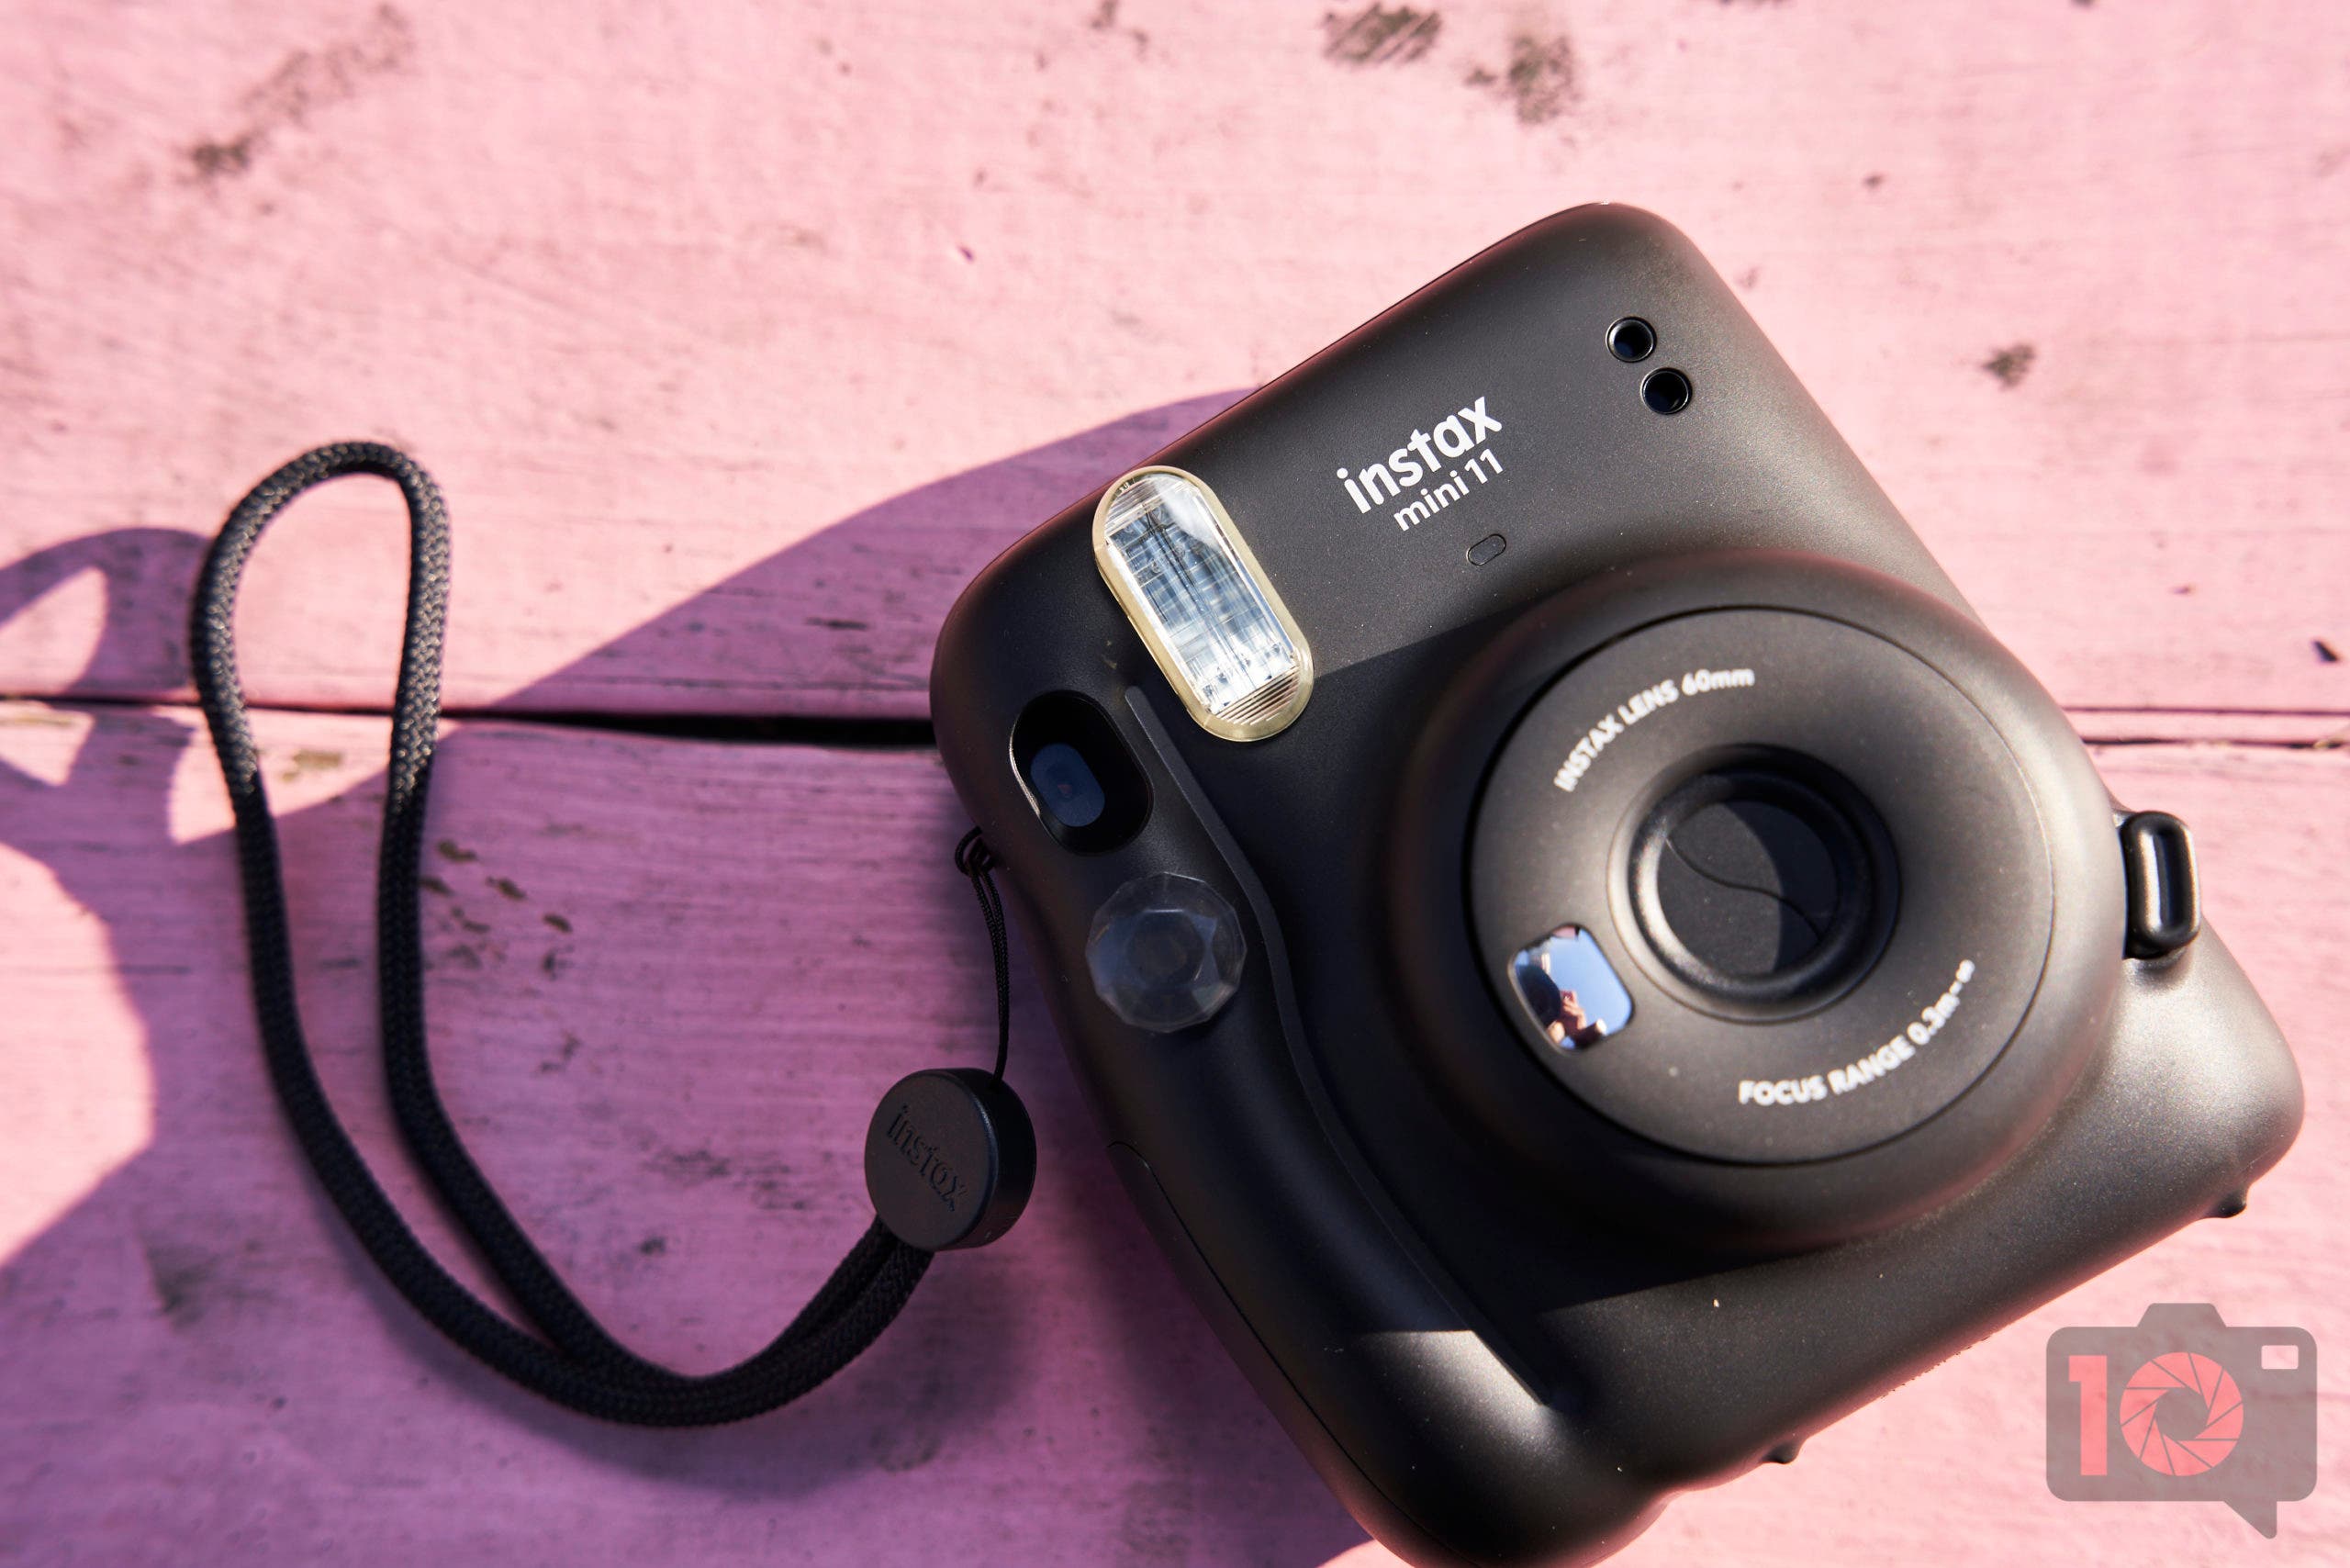 Review: Fujifilm INSTAX Mini 11 (Get Excited for a Glass Lens)